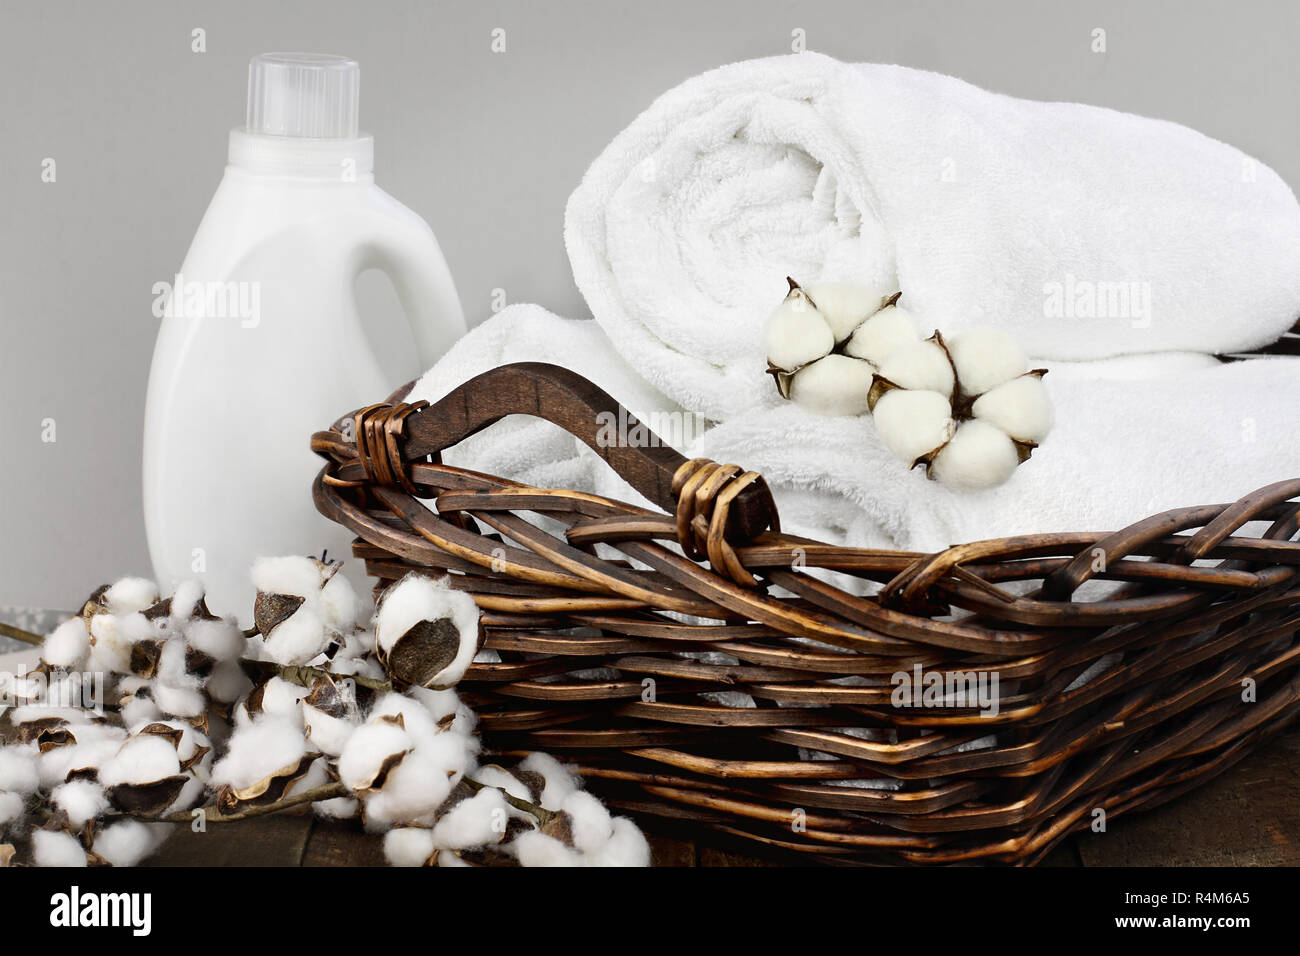 Laundry basket filled white fluffy towels, cotton flowers and a bottle of  liquid soap against a blurred grey background Stock Photo - Alamy